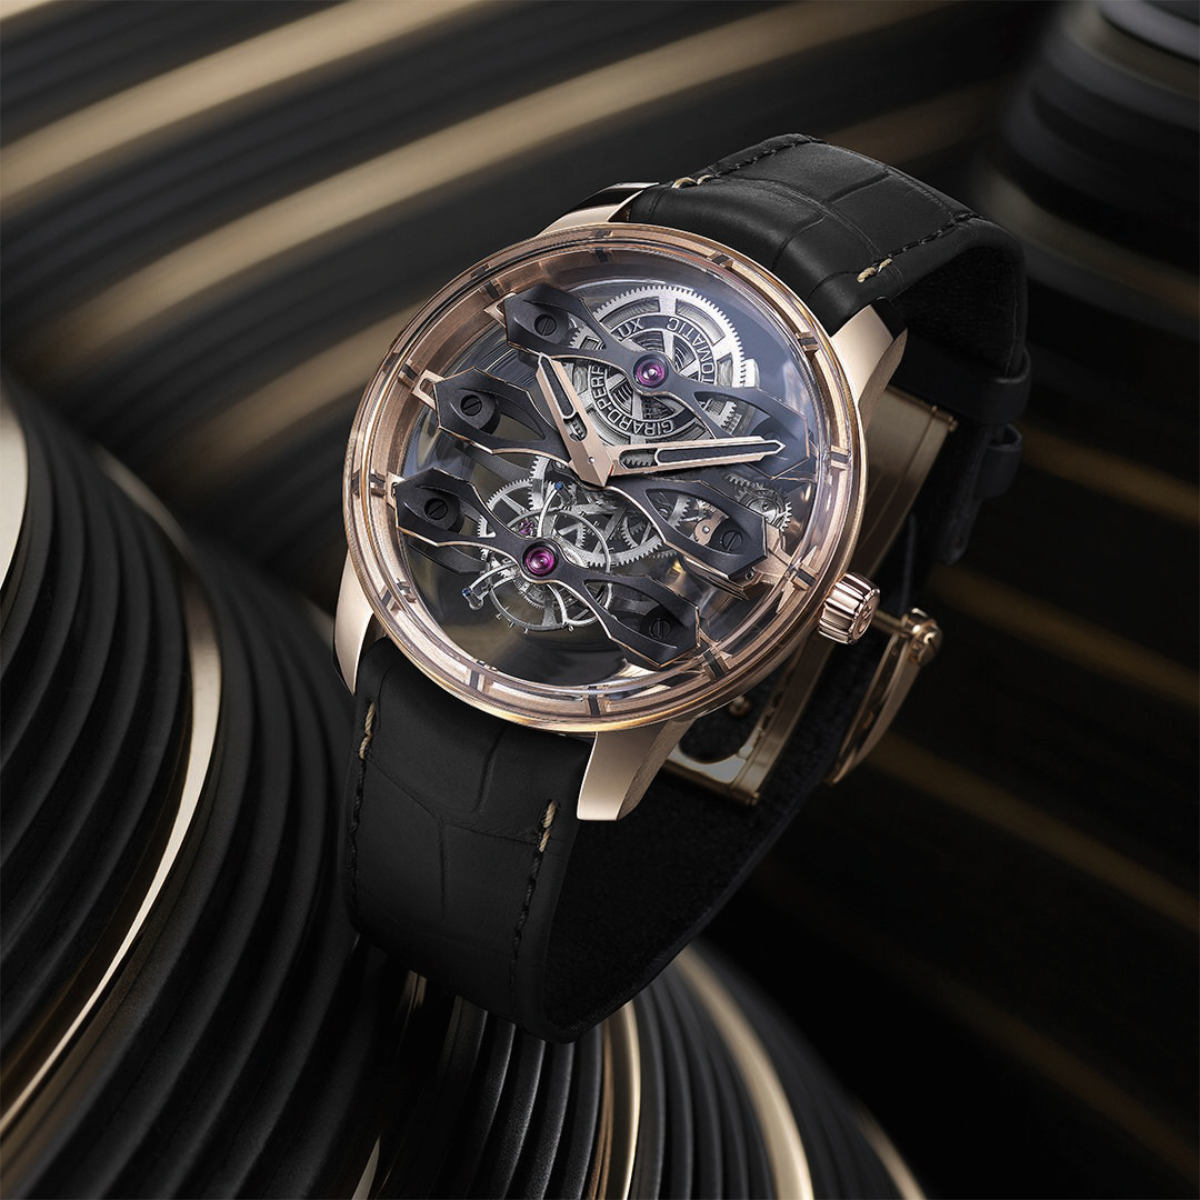 The Tourbillon with Three Flying Bridges is endowed with three Neo Bridges formed of pink gold, the